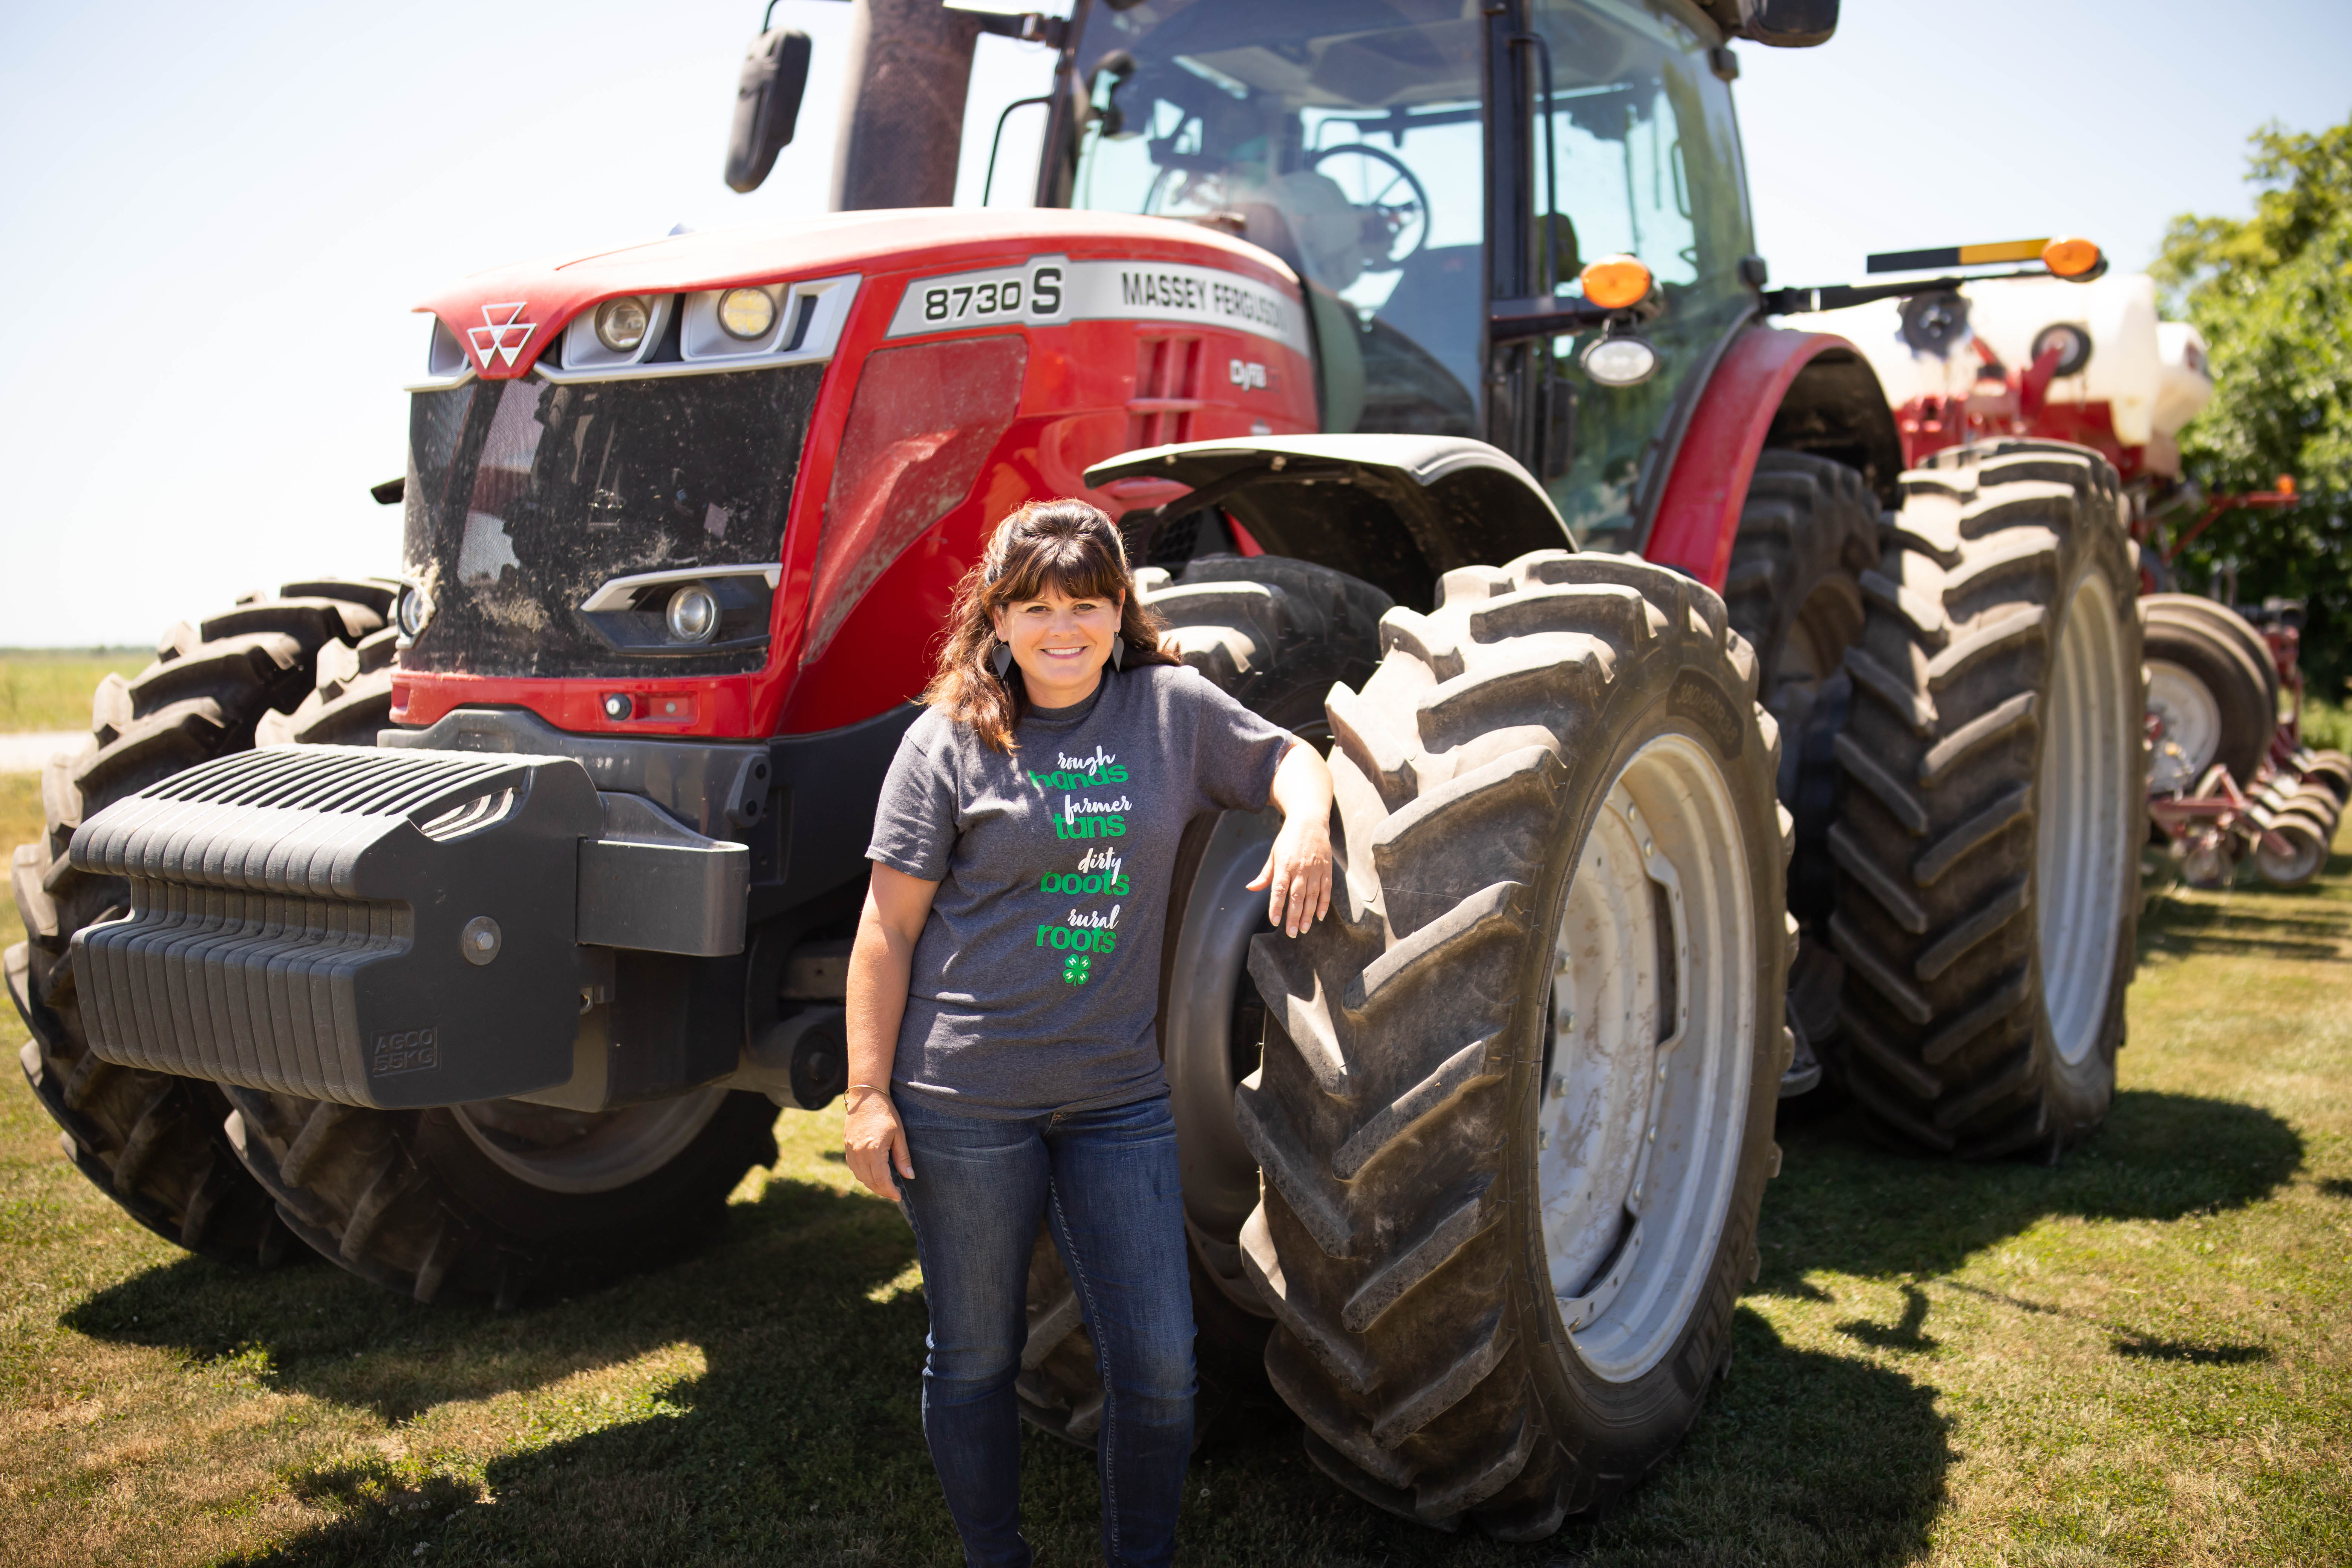 Paula Ellis poses in front of a tractor